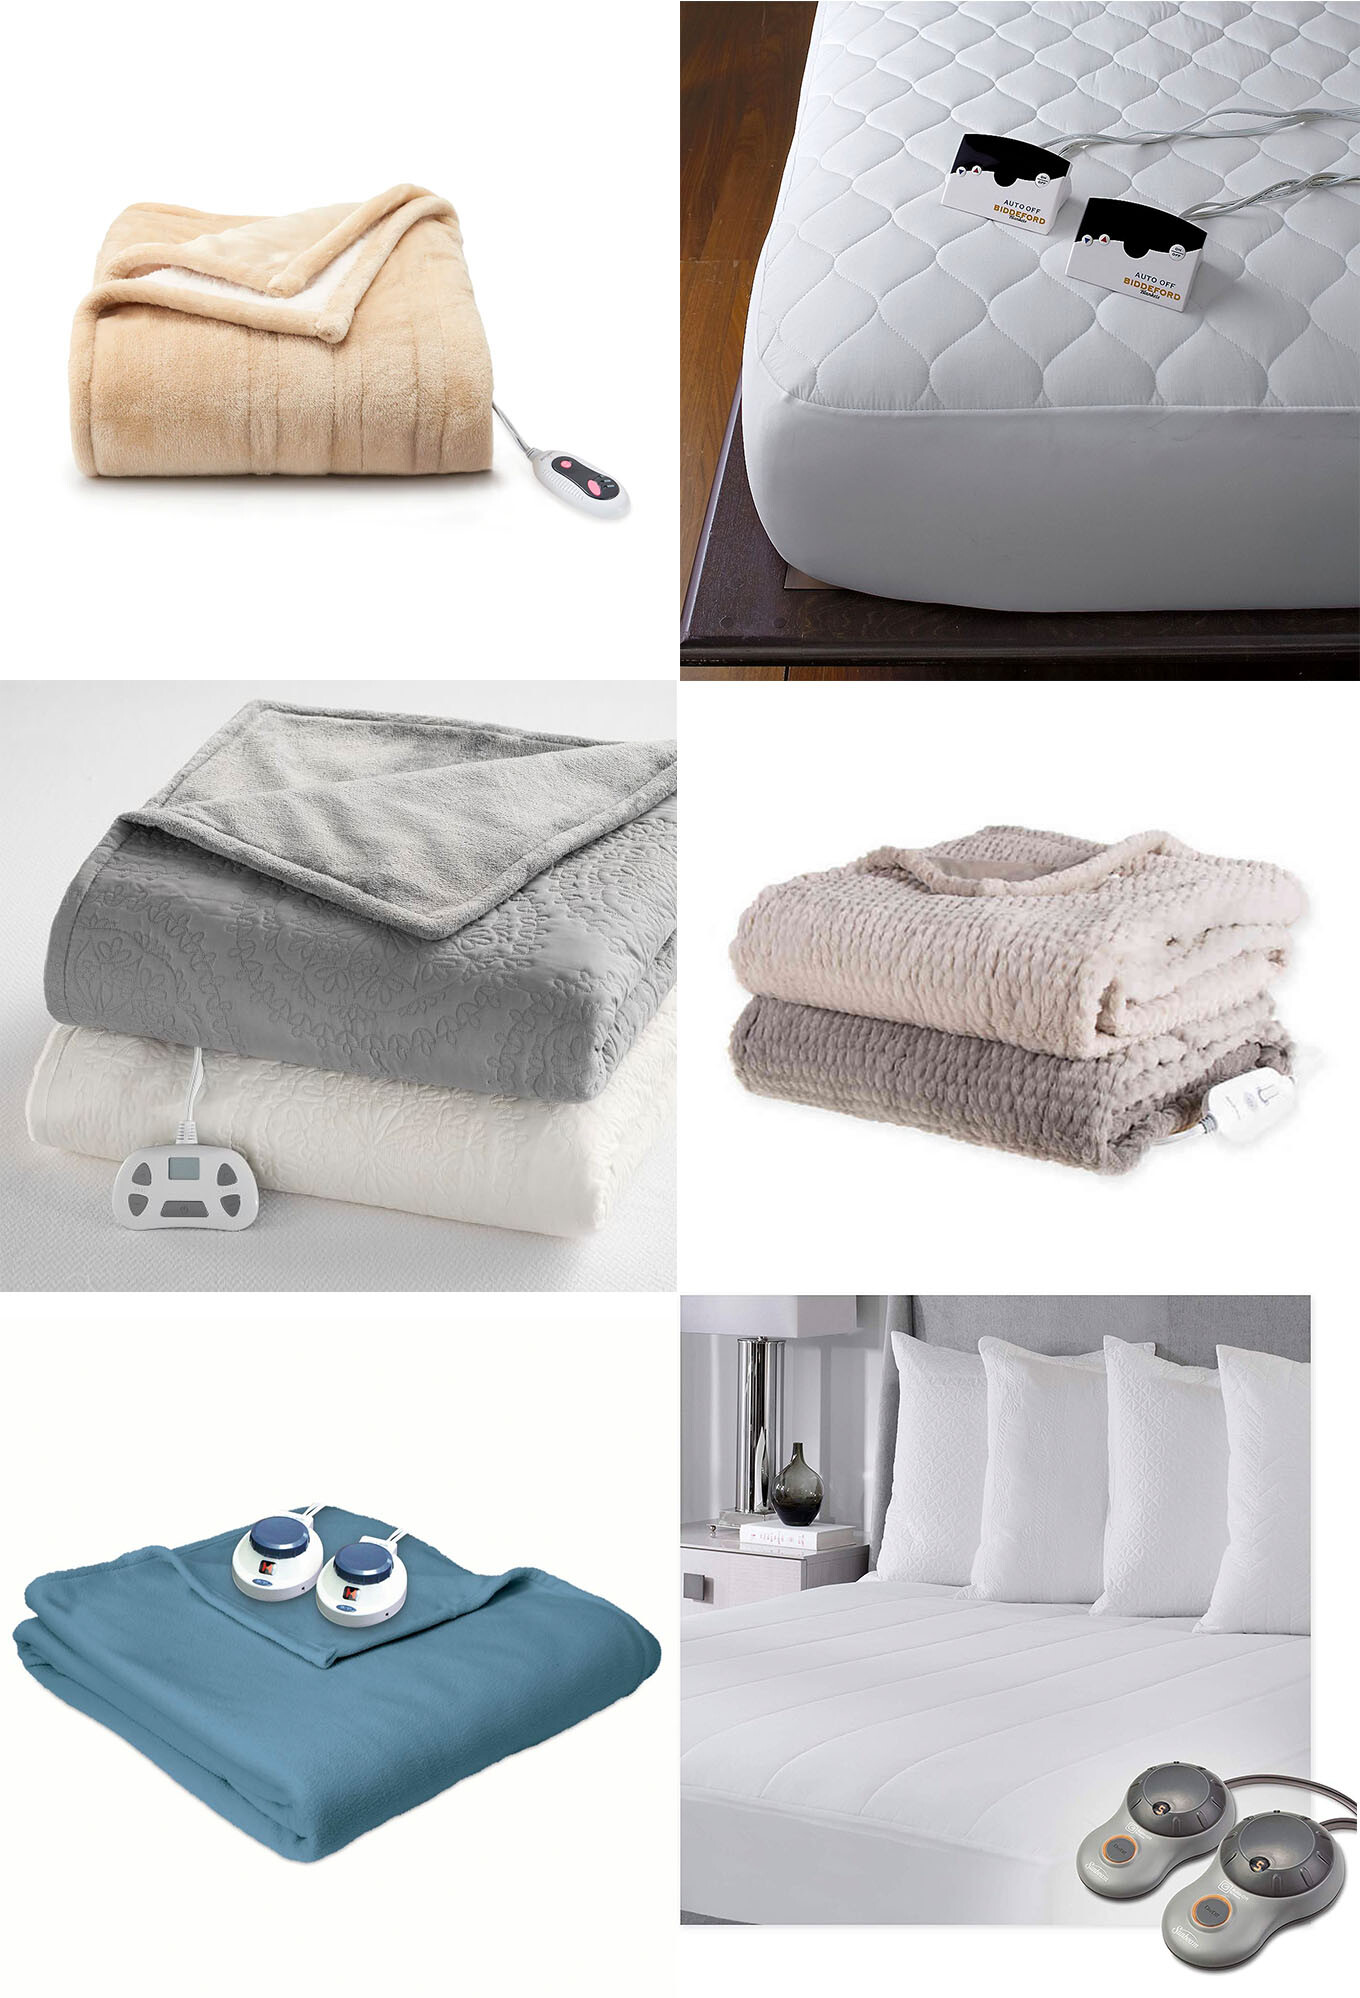 Keep warm with a yummy and warm heated mattress pad or blanket. They are the perfect way to warm up your bed or cozy up on the couch!